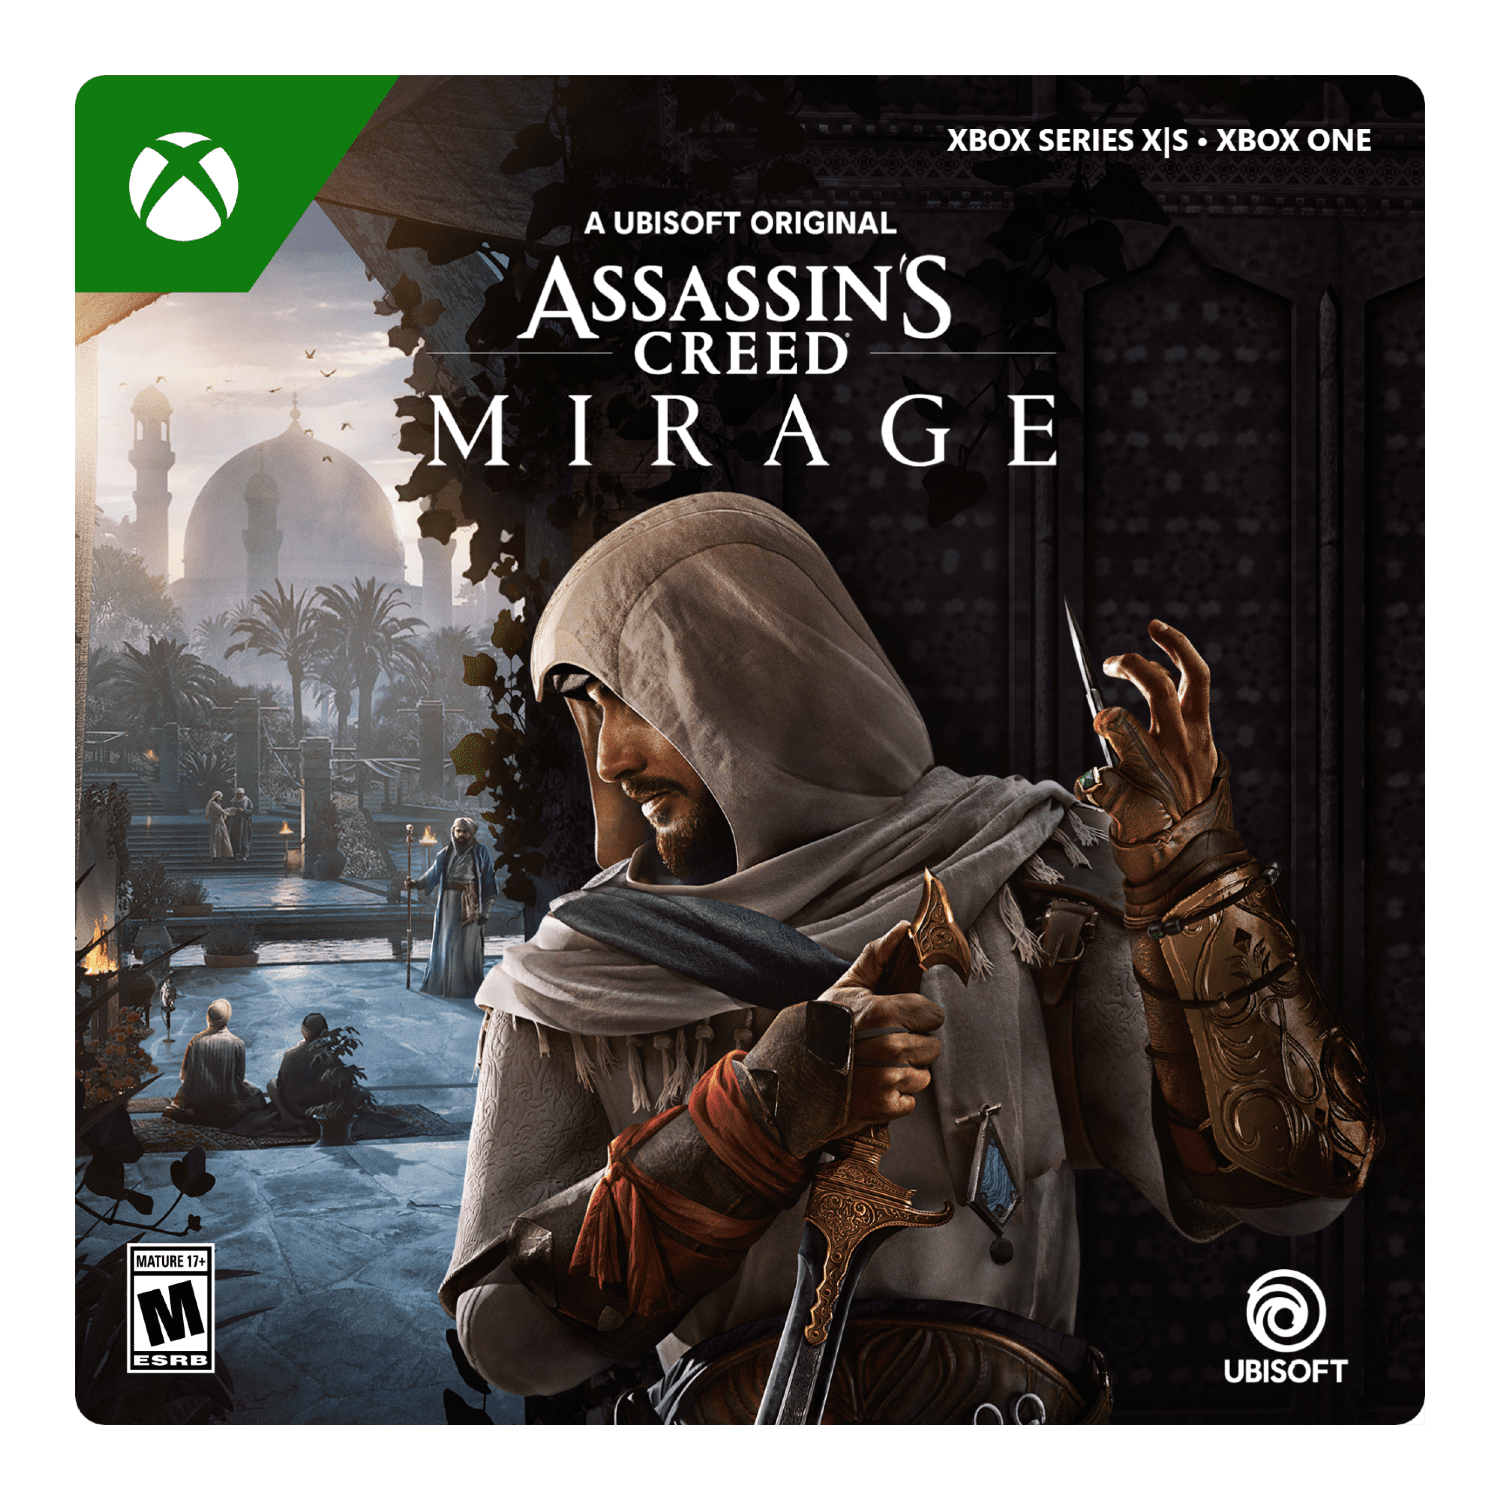 Mirage Game Studios Archives - Xbox Wire